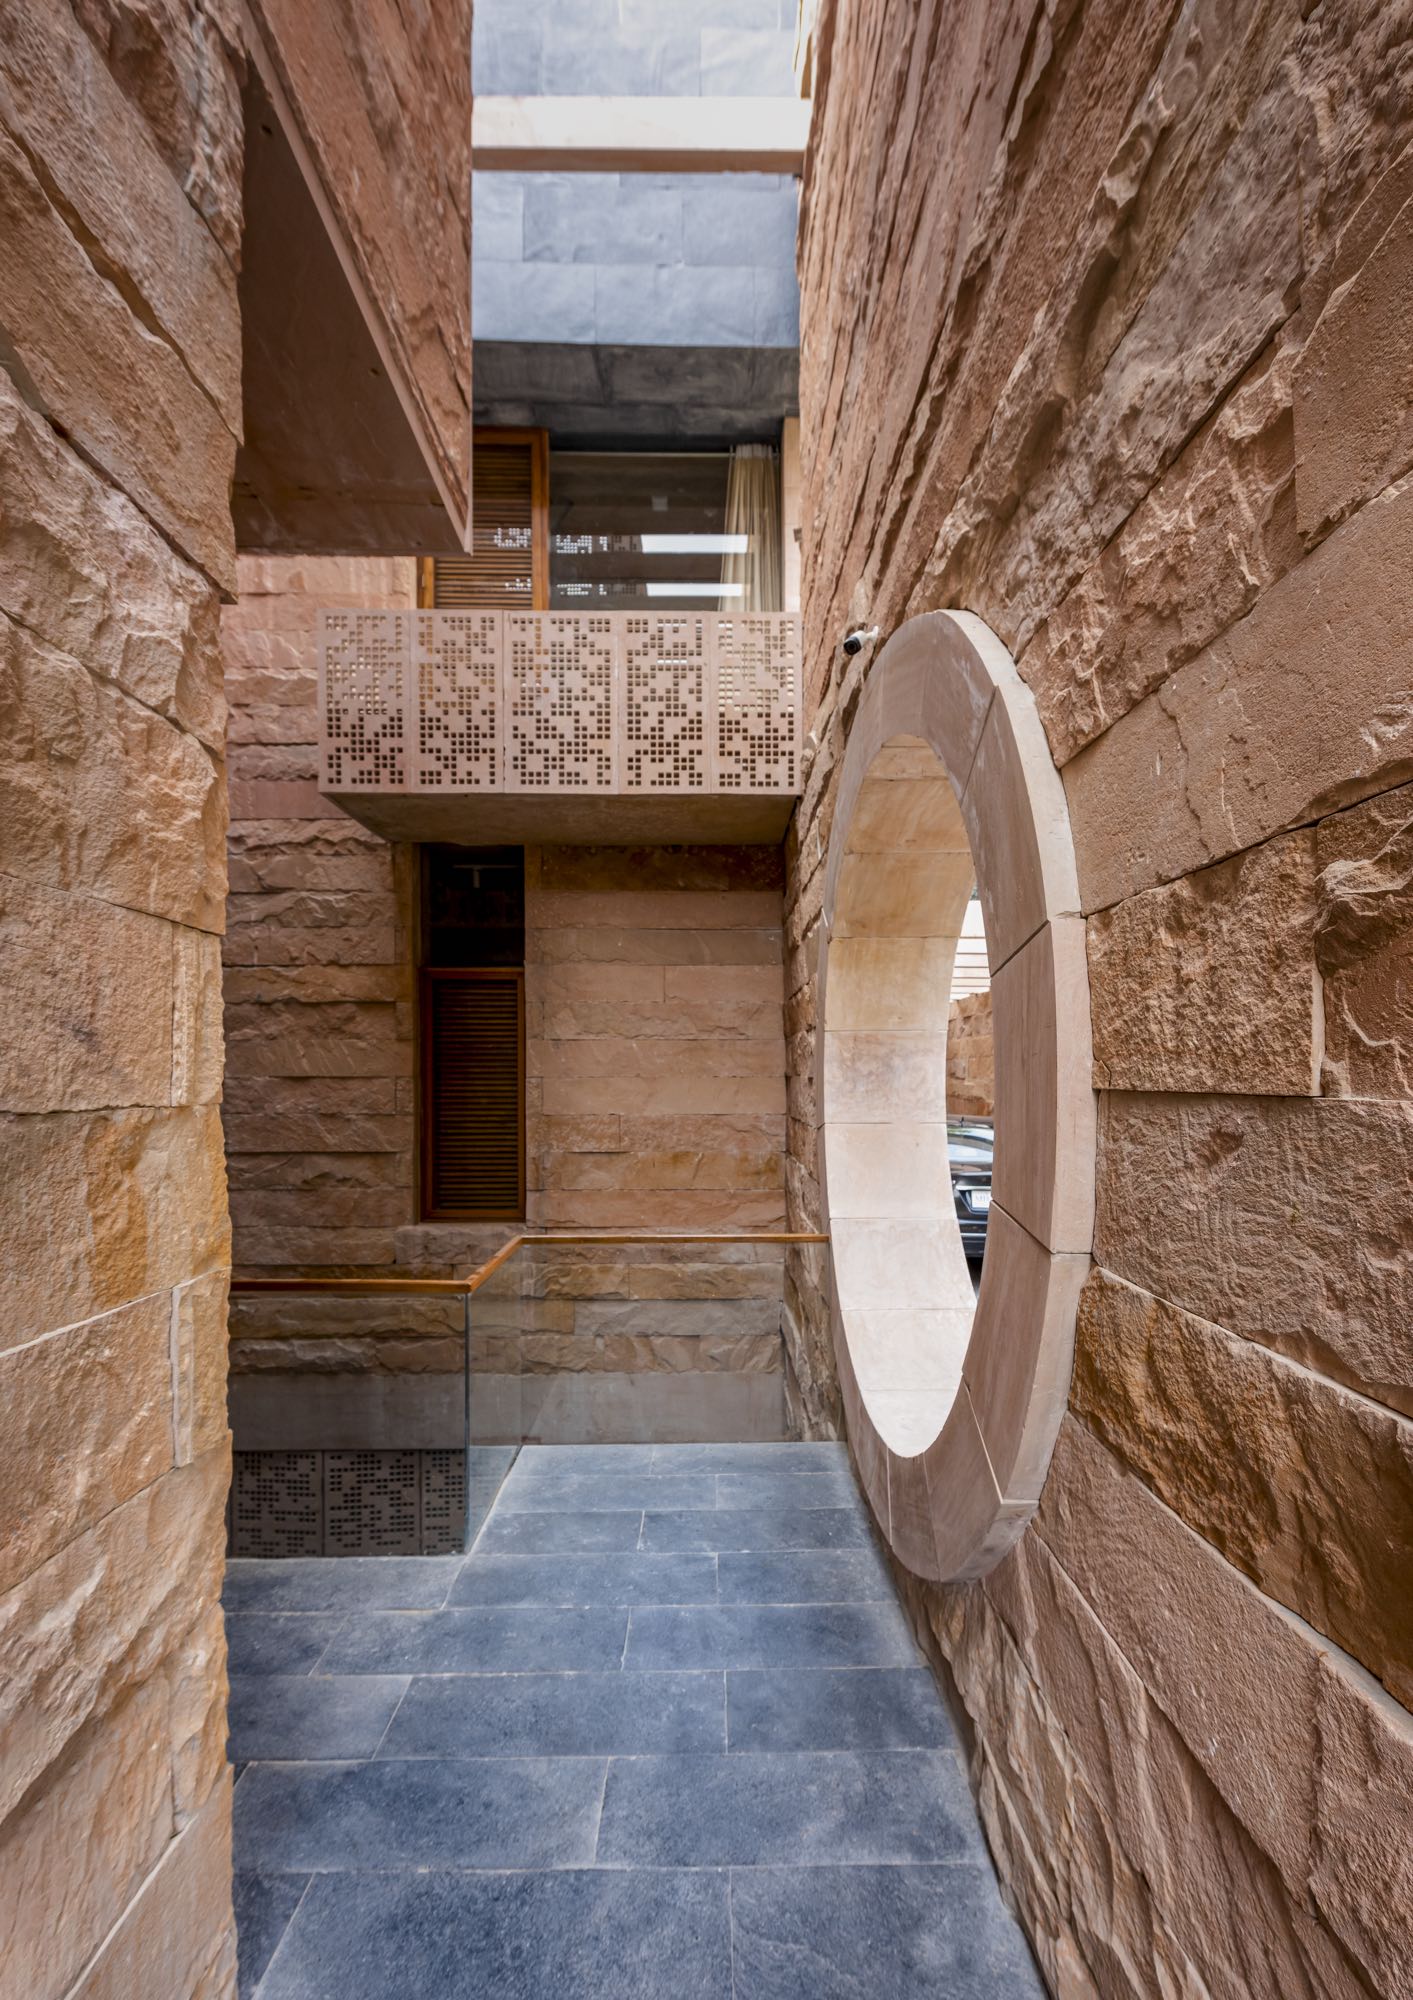 The main entry into the house through a split between monumental stone walls leads to a naturally ventilated courtyard that connects the ground, sunken court, and the sky. Even within a restricted footprin | Bharath Ramamrutham